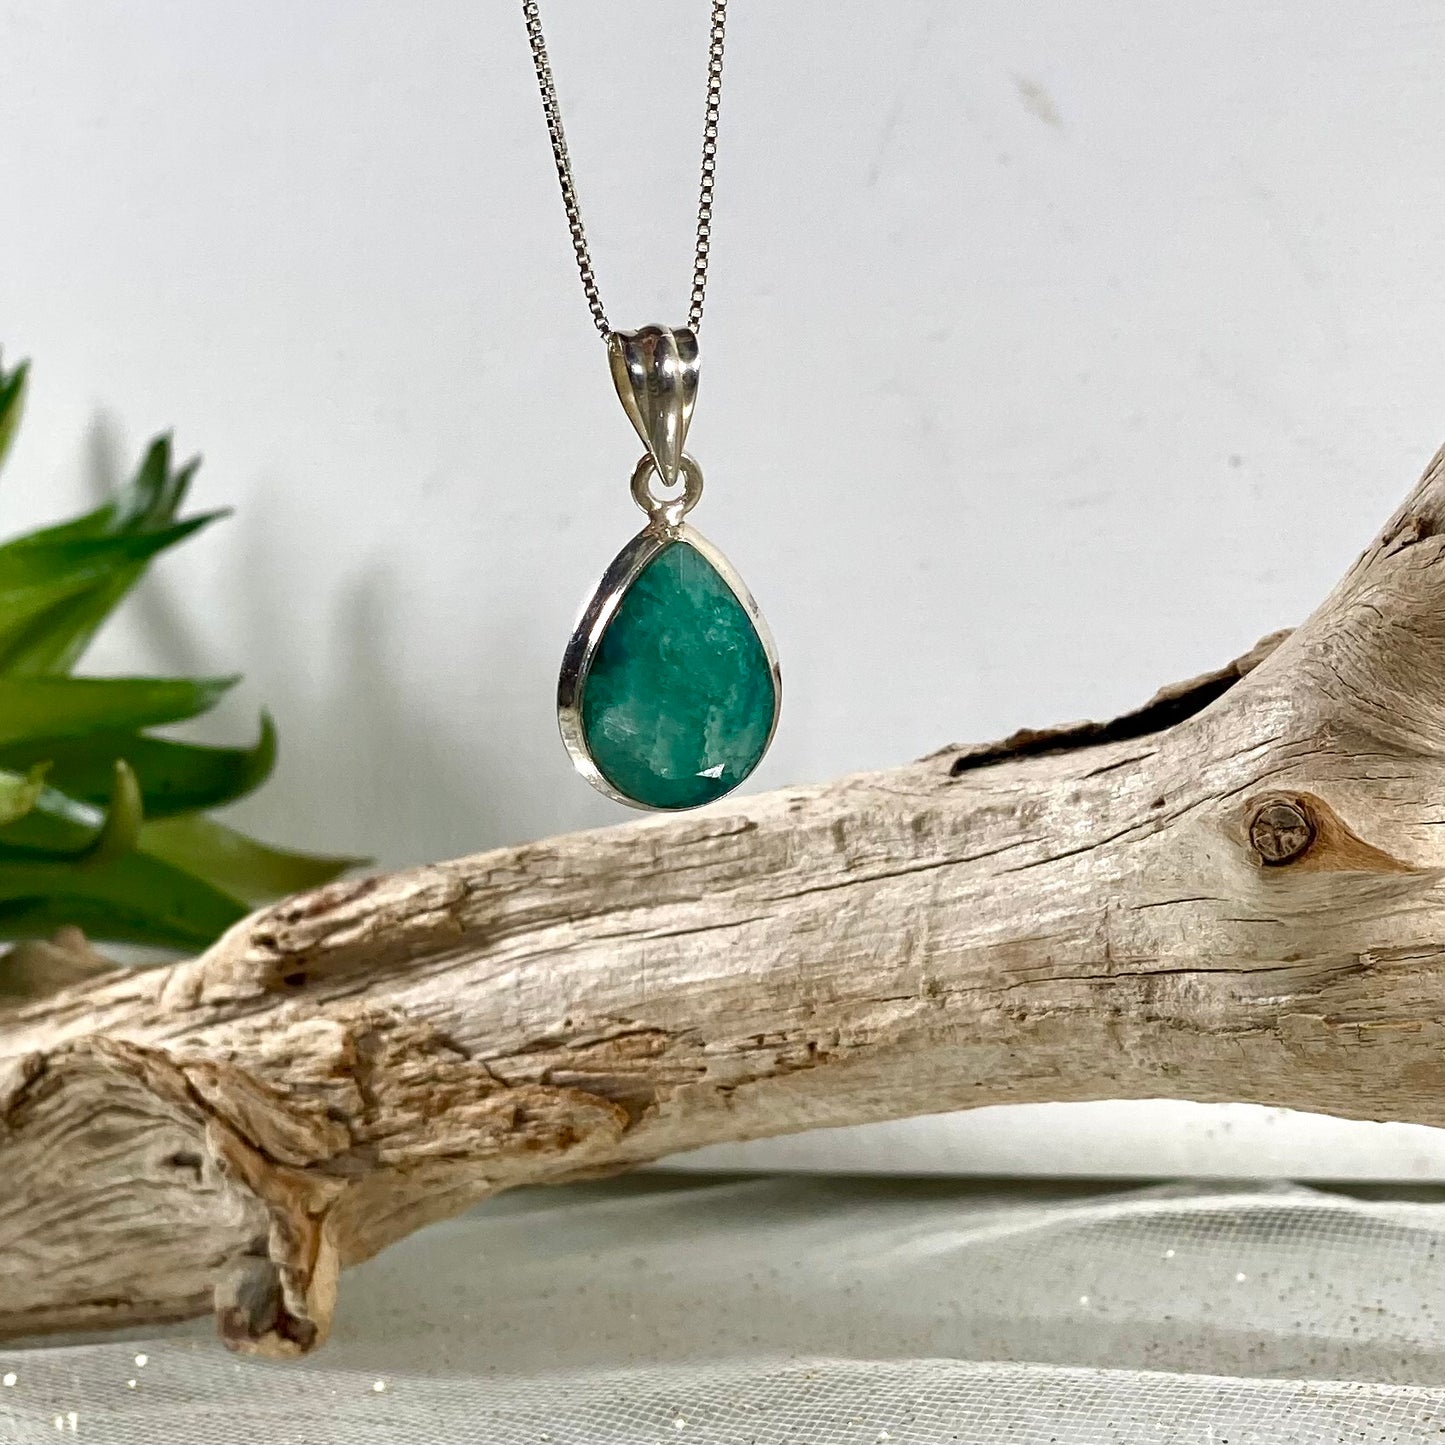 Indian Jade Crystal Healing Necklace - 16 inches of Tranquil Elegance in Sterling Silver